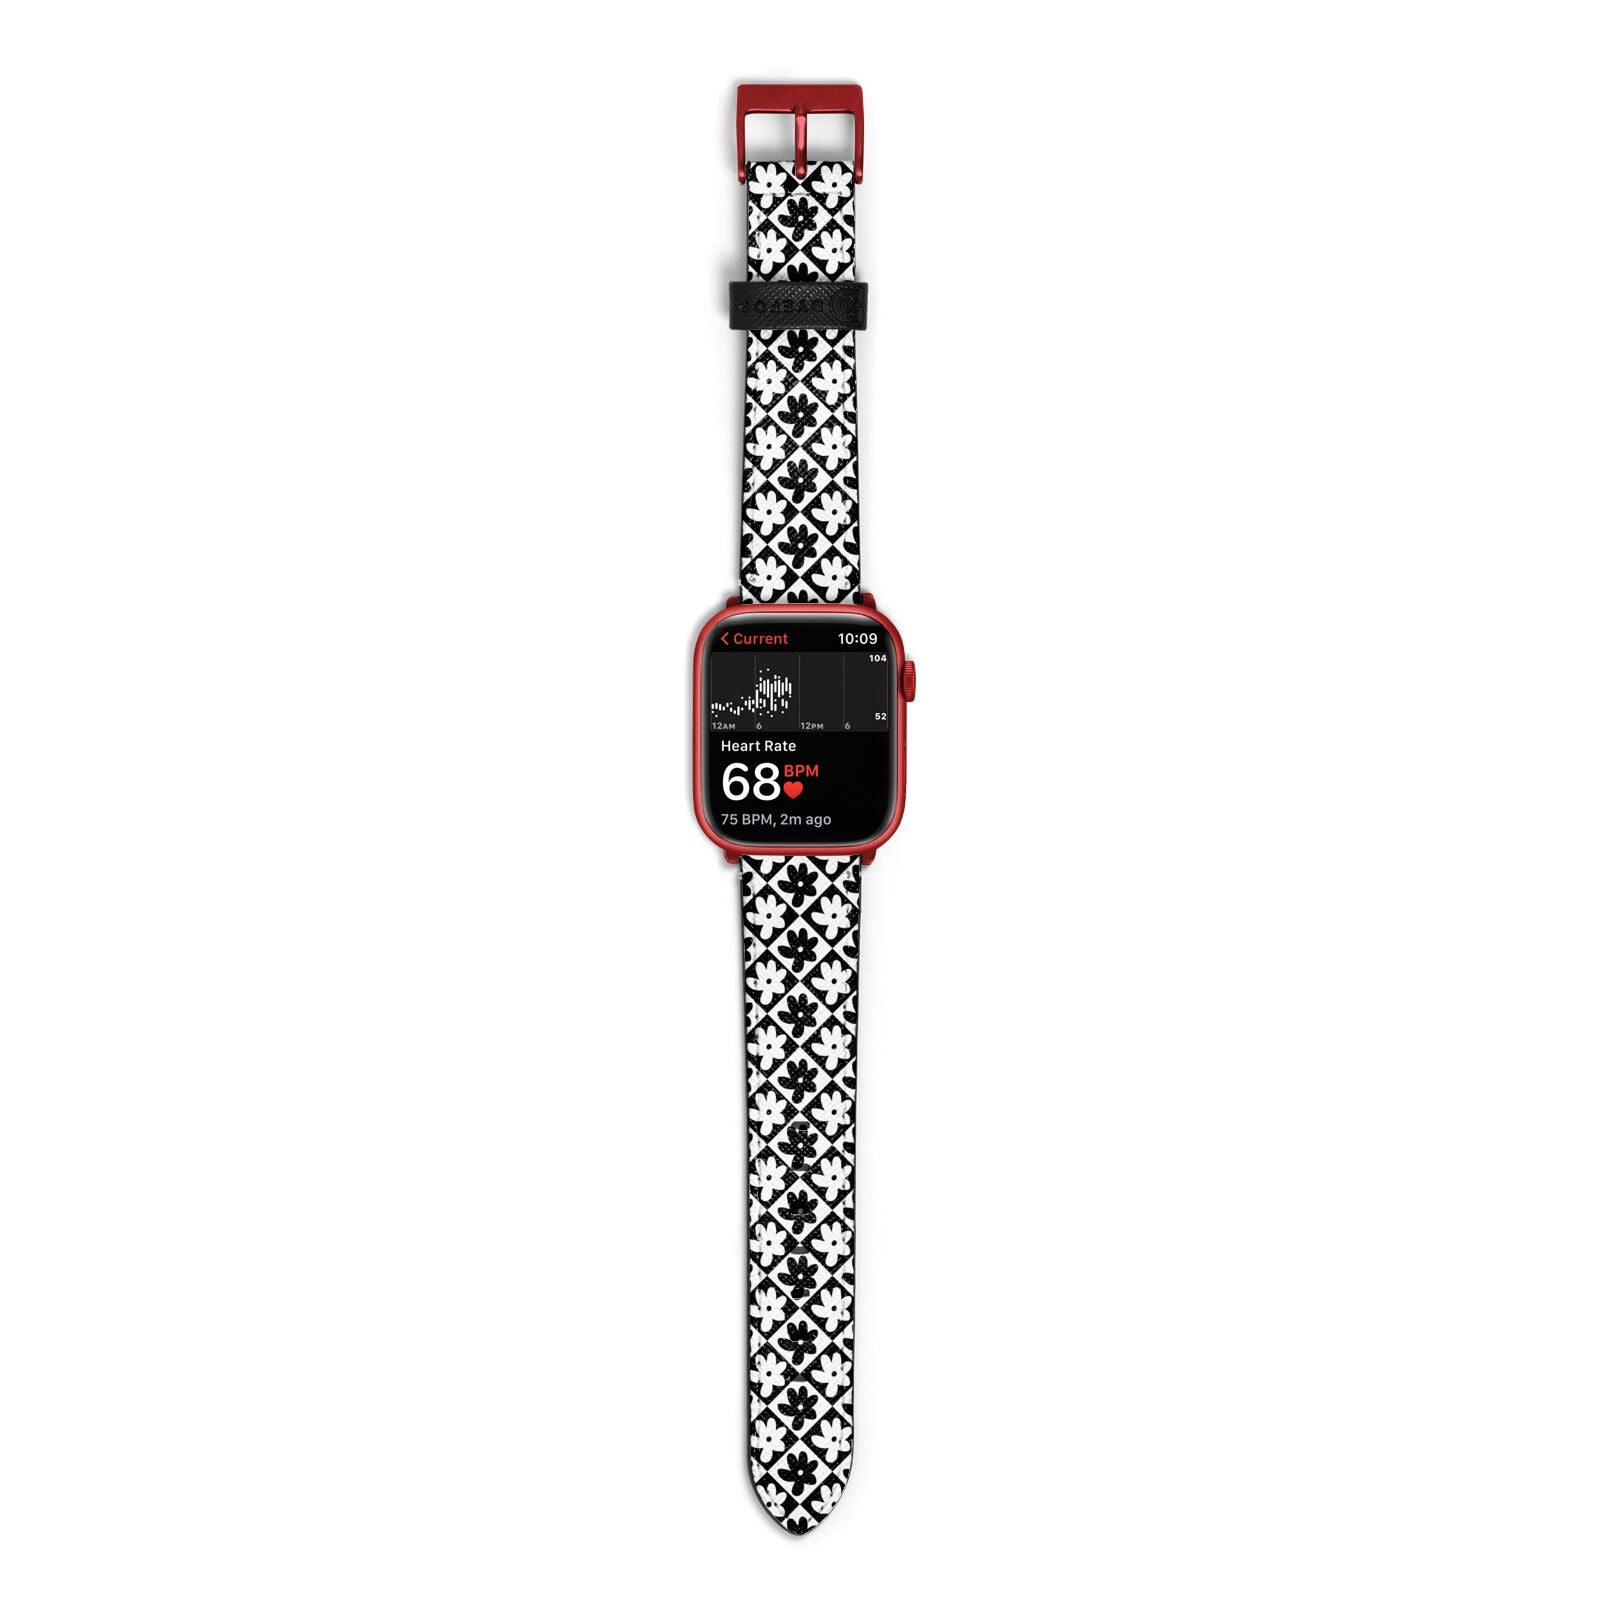 Check Flower Apple Watch Strap Size 38mm with Red Hardware